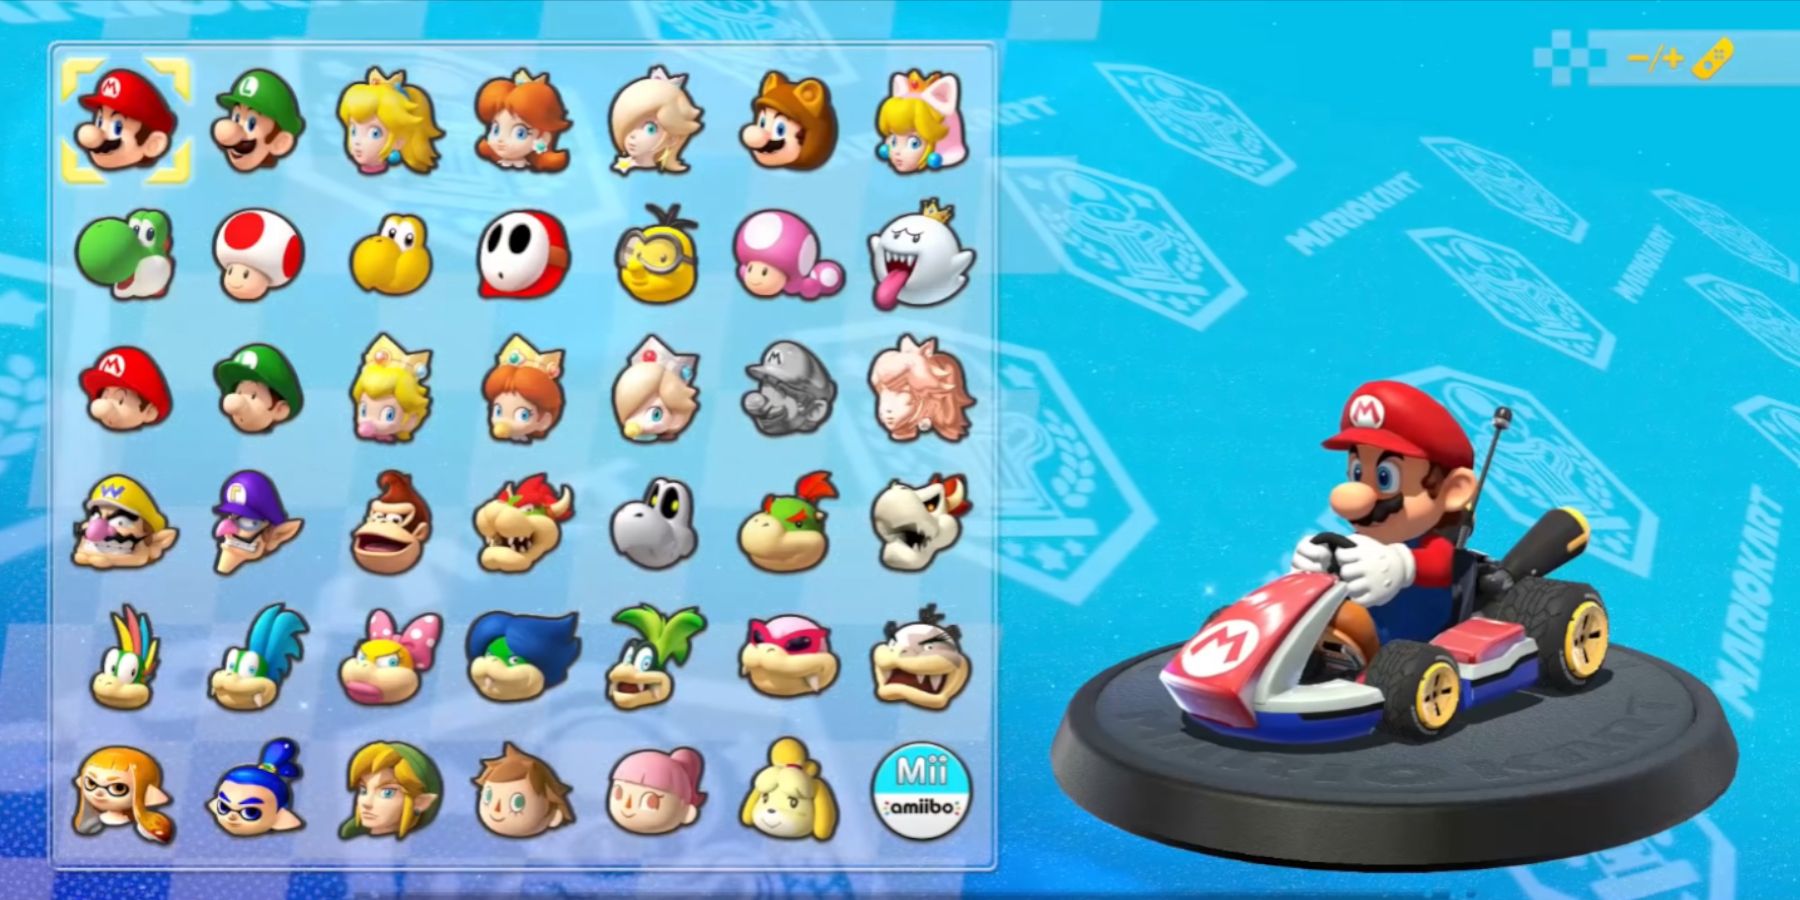 Mario is focused on the character roster from Mario Kart 8 Deluxe.